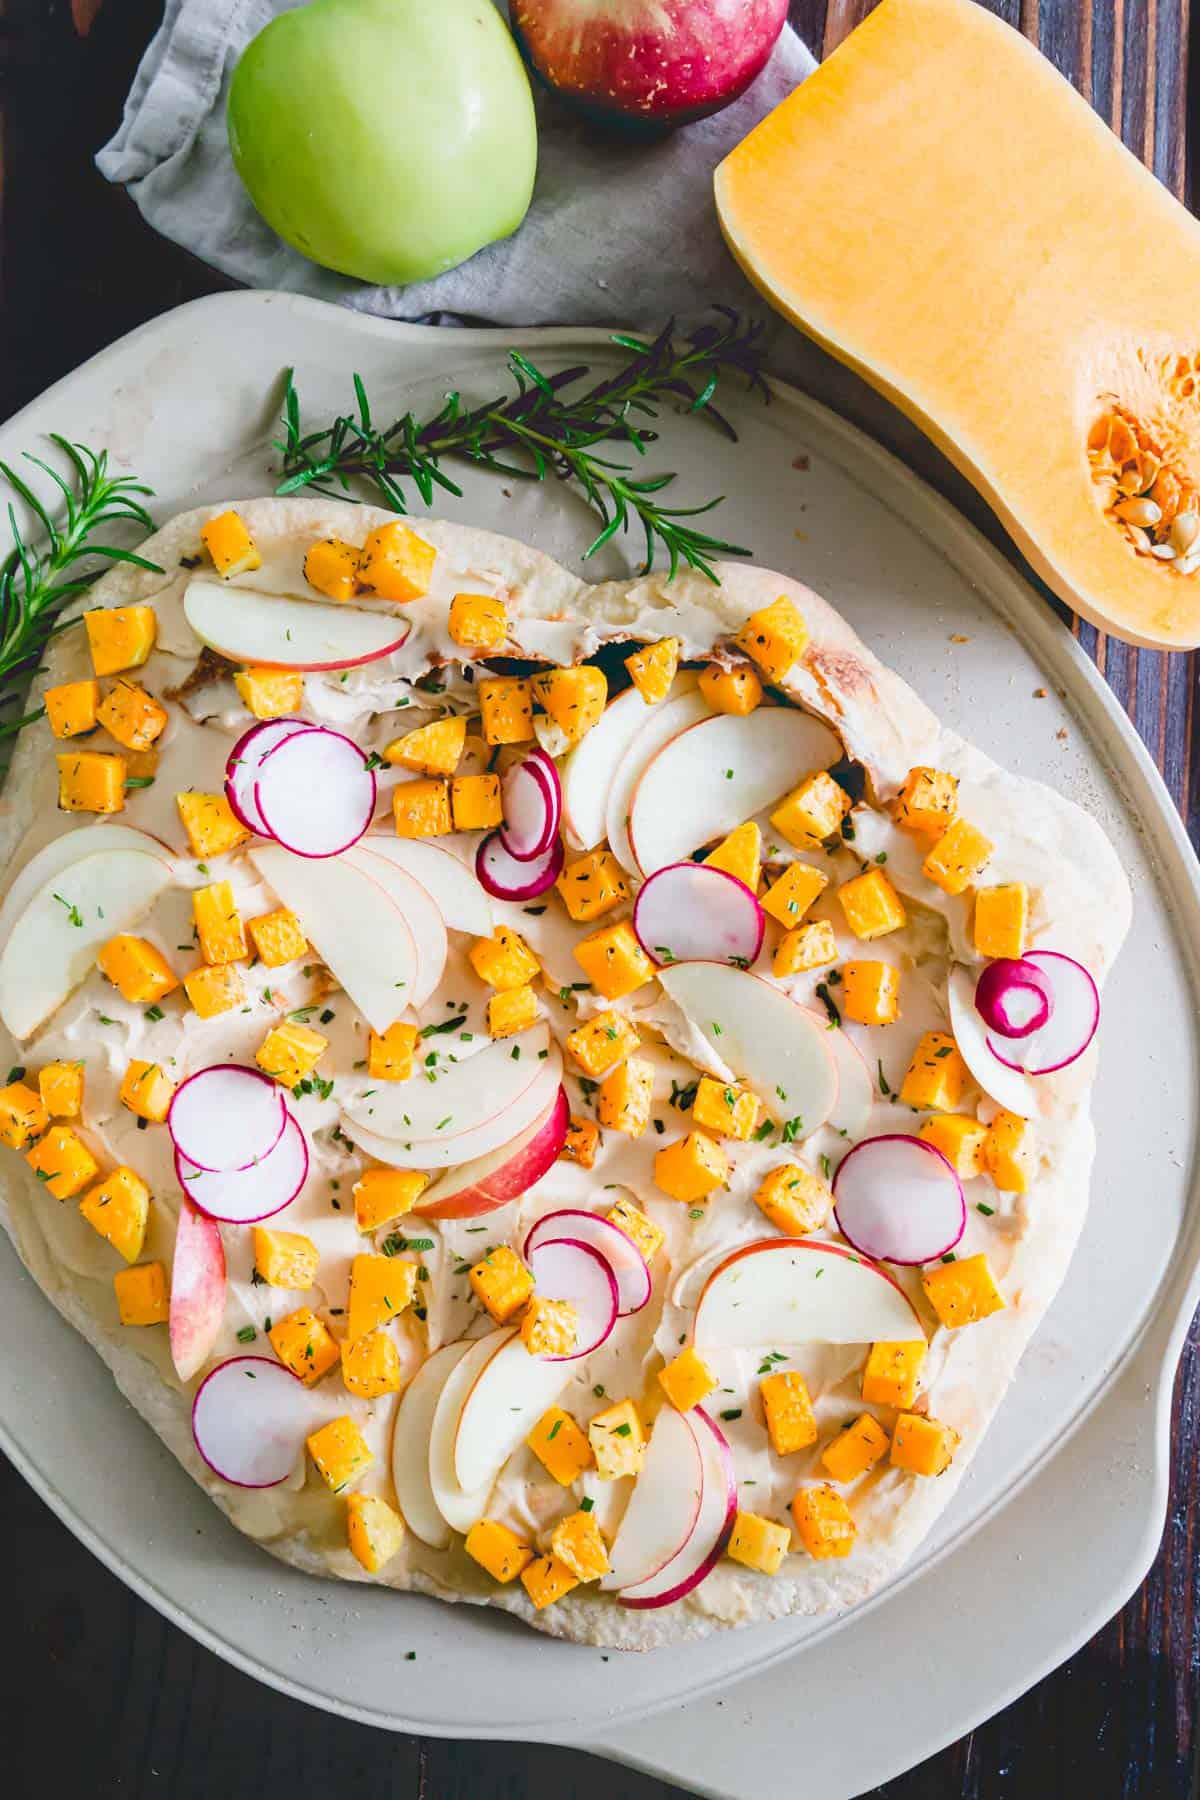 rosemary seasoned roasted butternut squash cubes, thinly sliced radishes and crunchy apple slices top this hummus pizza for a delicious fall meal